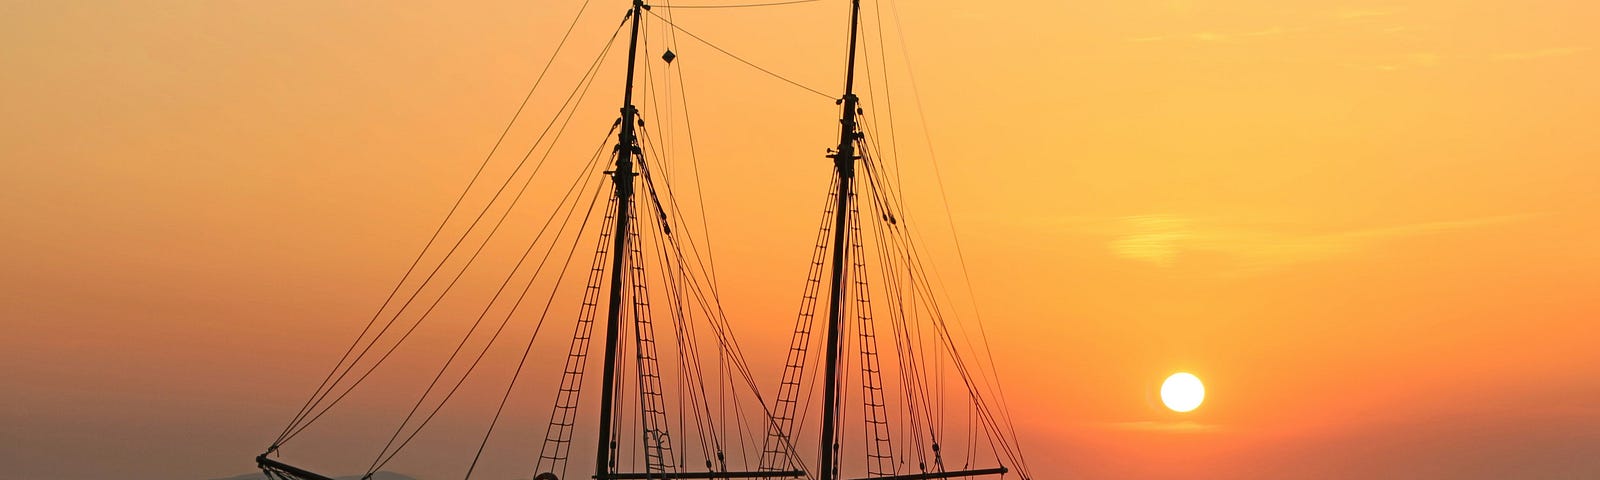 An orange sky as the sun sets over the calm waters. A lone ship that only hours later will hit the rocky coastline.